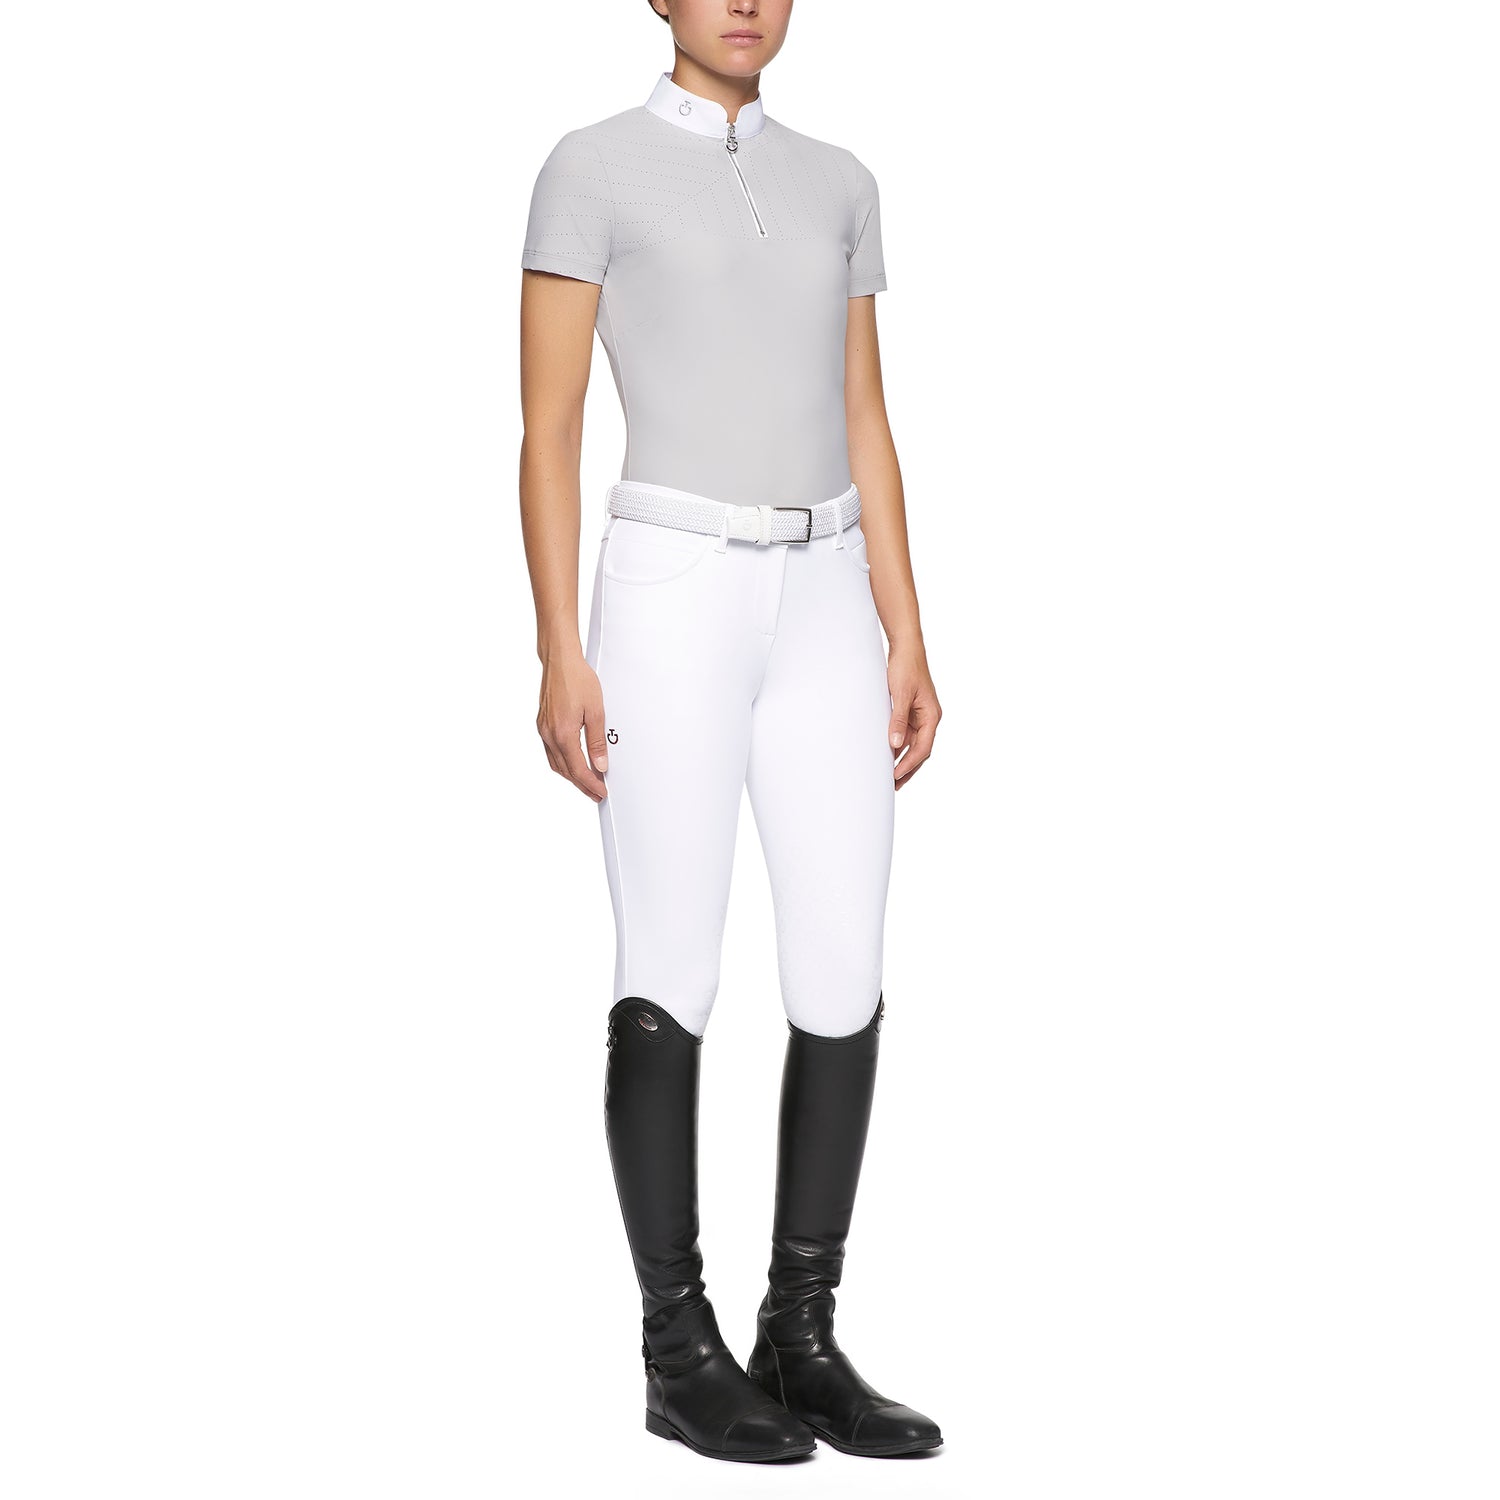 New Grip System Breeches Toscana